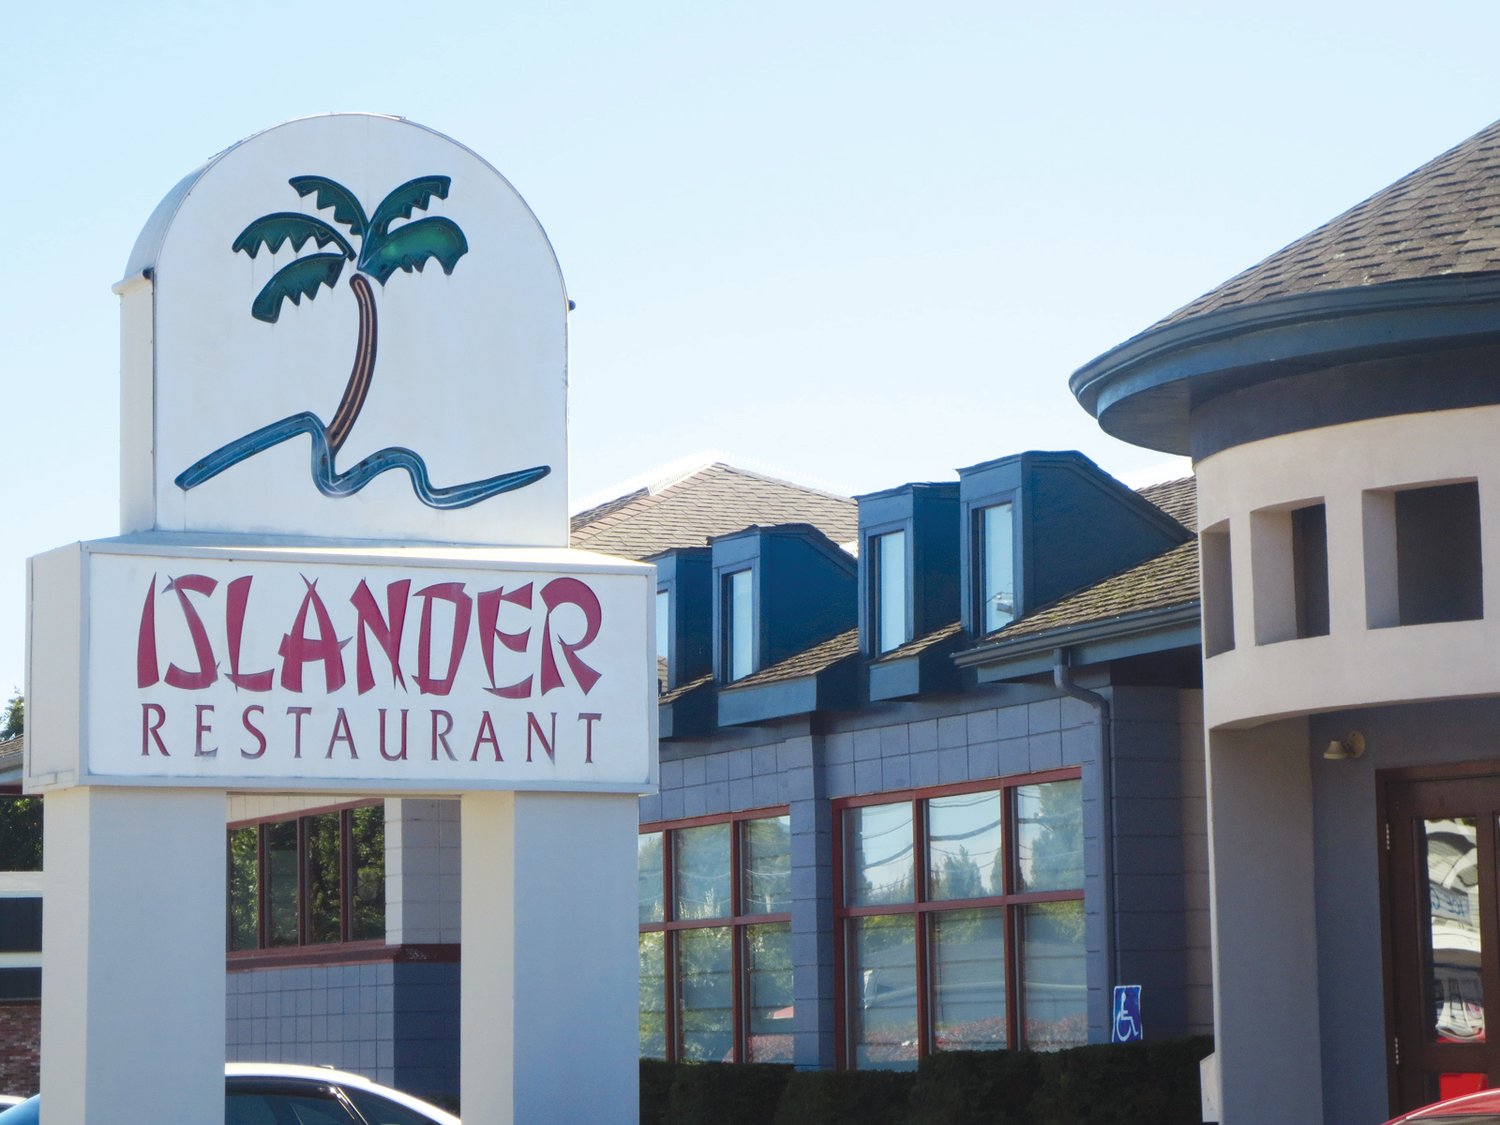 The Islander Restaurant has been a steady sight on the Warwick culinary landscape for decades. The team of cooks, servers, and owners at this longstanding restaurant in the city wish you and your loved ones a happy, safe, and prosperous 2023!